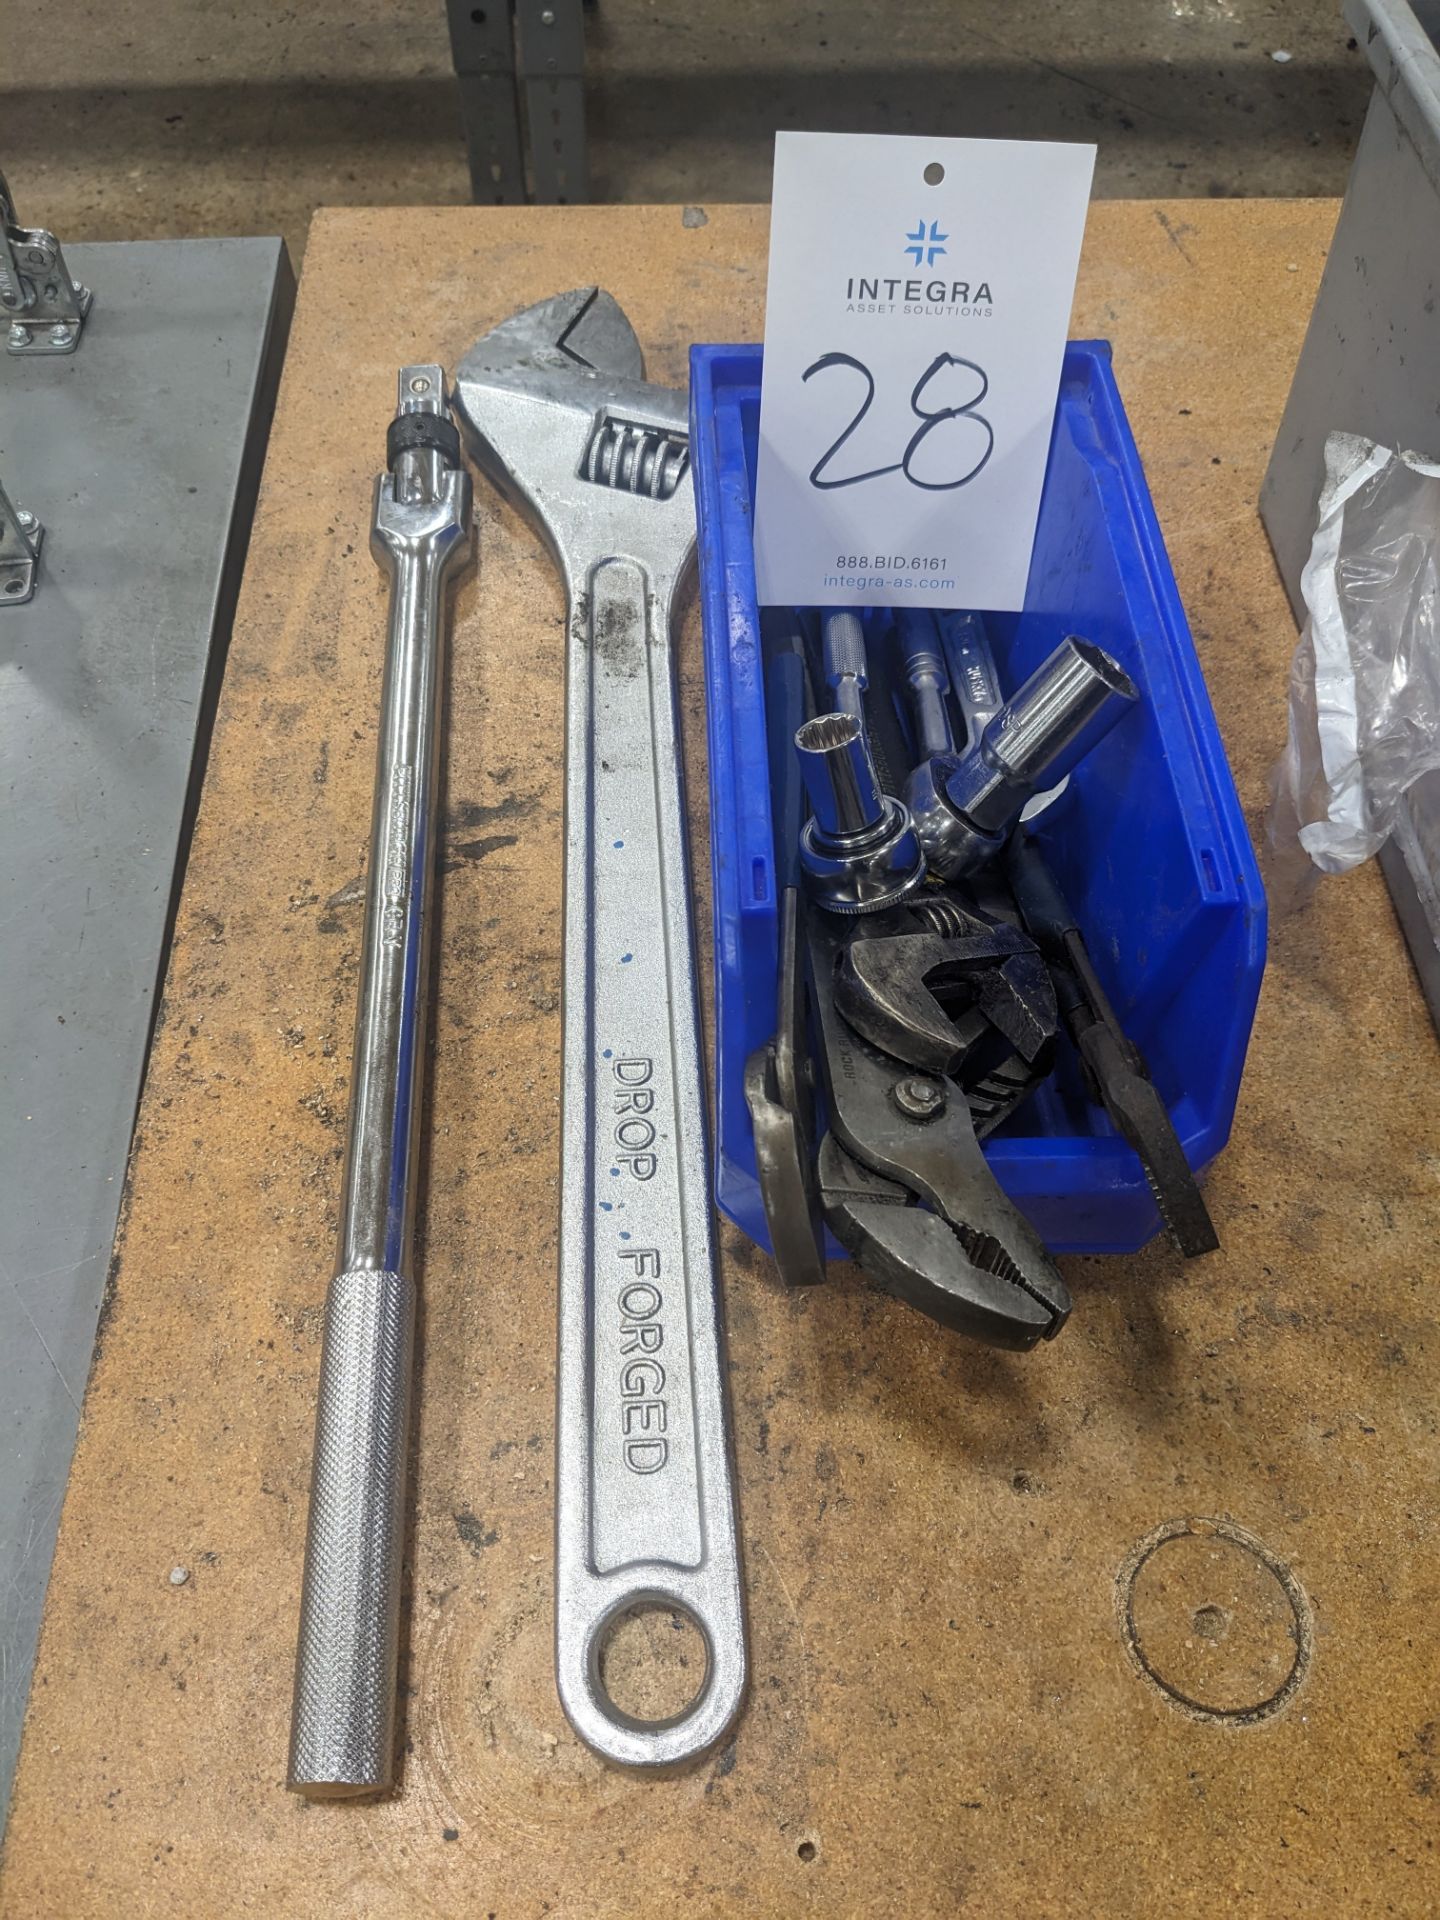 Lot of Assorted Adjustable Wrenches, Pliers, and Ratchets